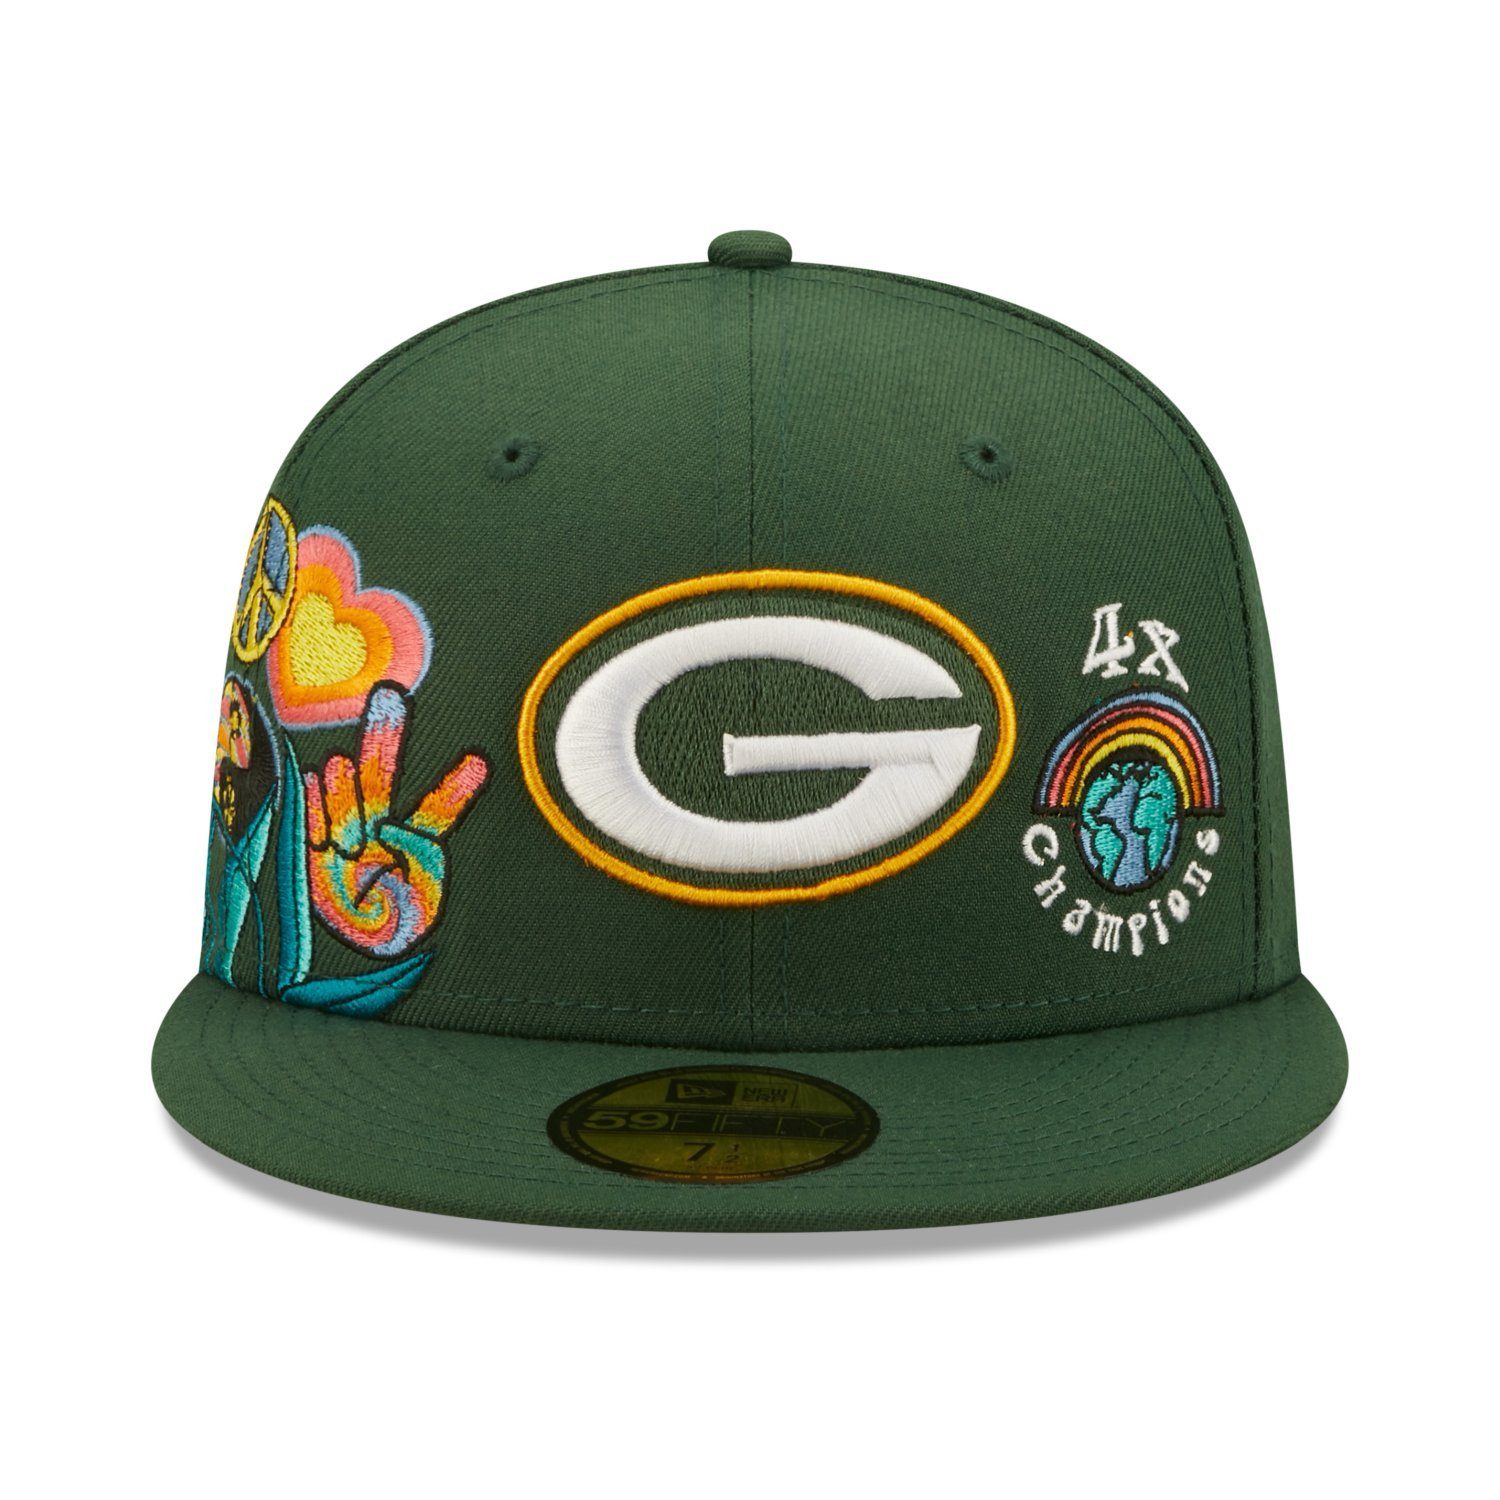 Era 59Fifty Fitted Cap New Green GROOVY Packers Bay